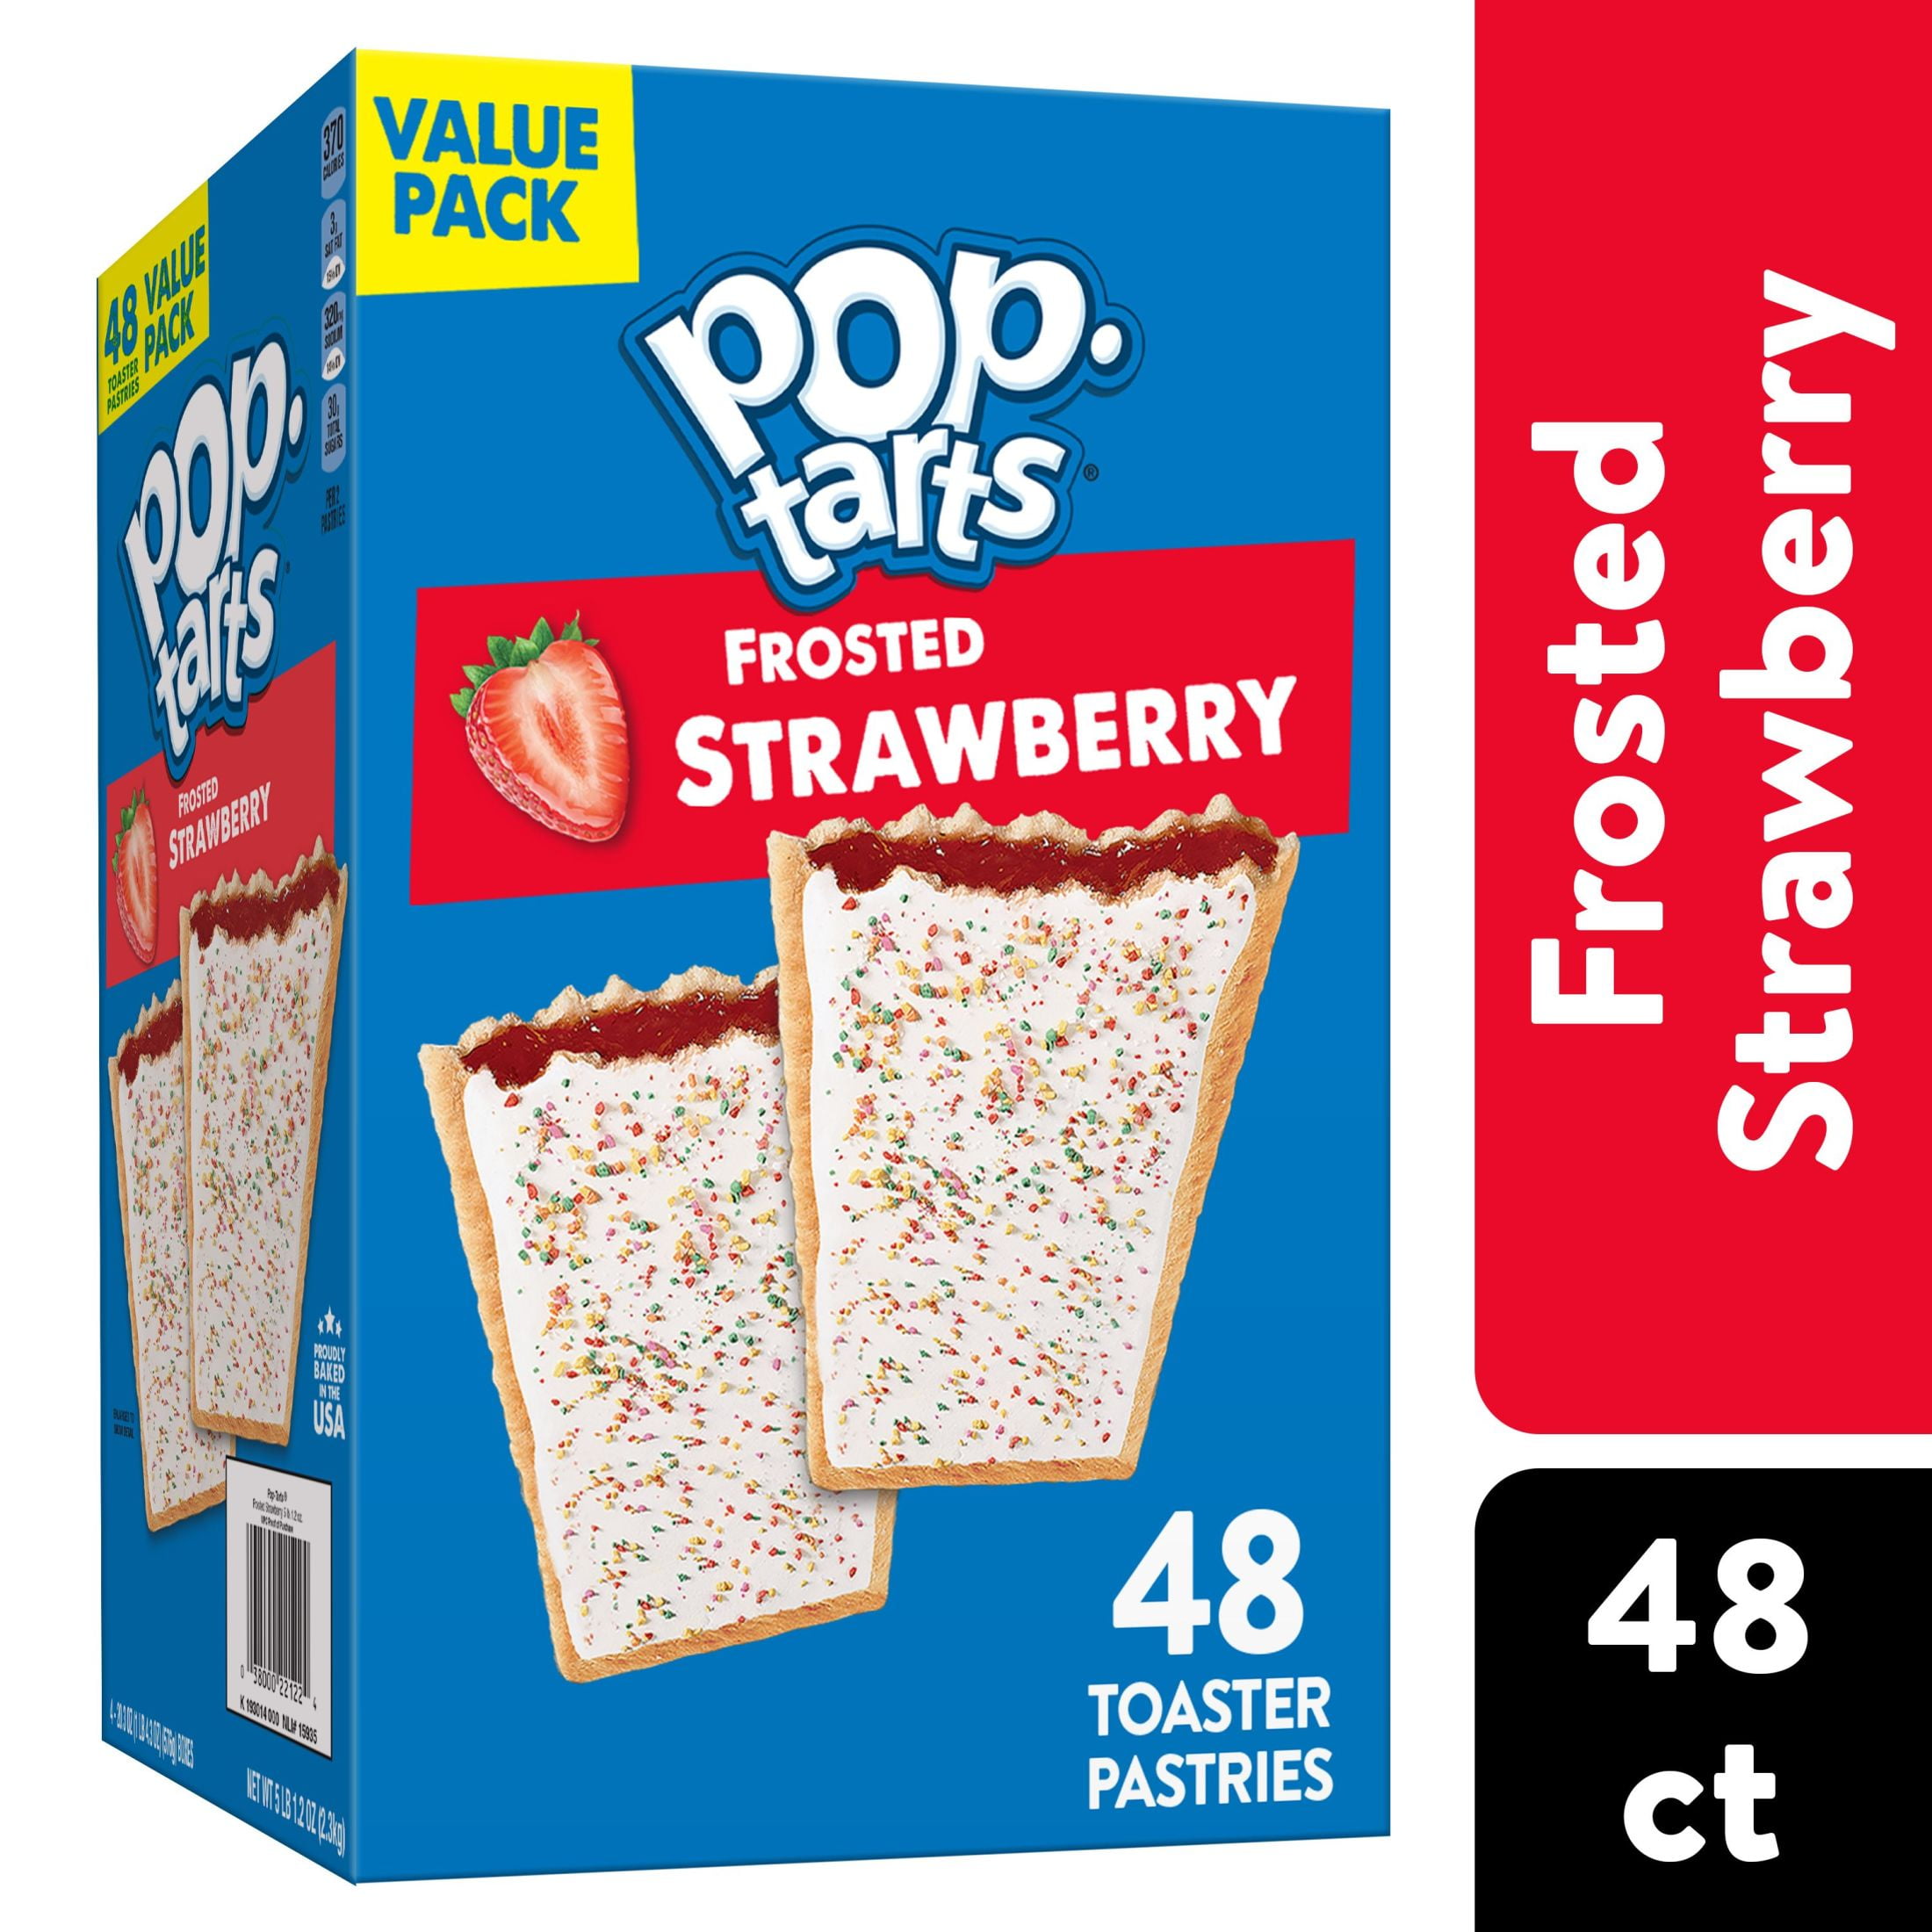 Pop-Tarts Frosted Strawberry Instant Breakfast Toaster Pastries, Milk-Free,  81.2 oz,  48 Count Box